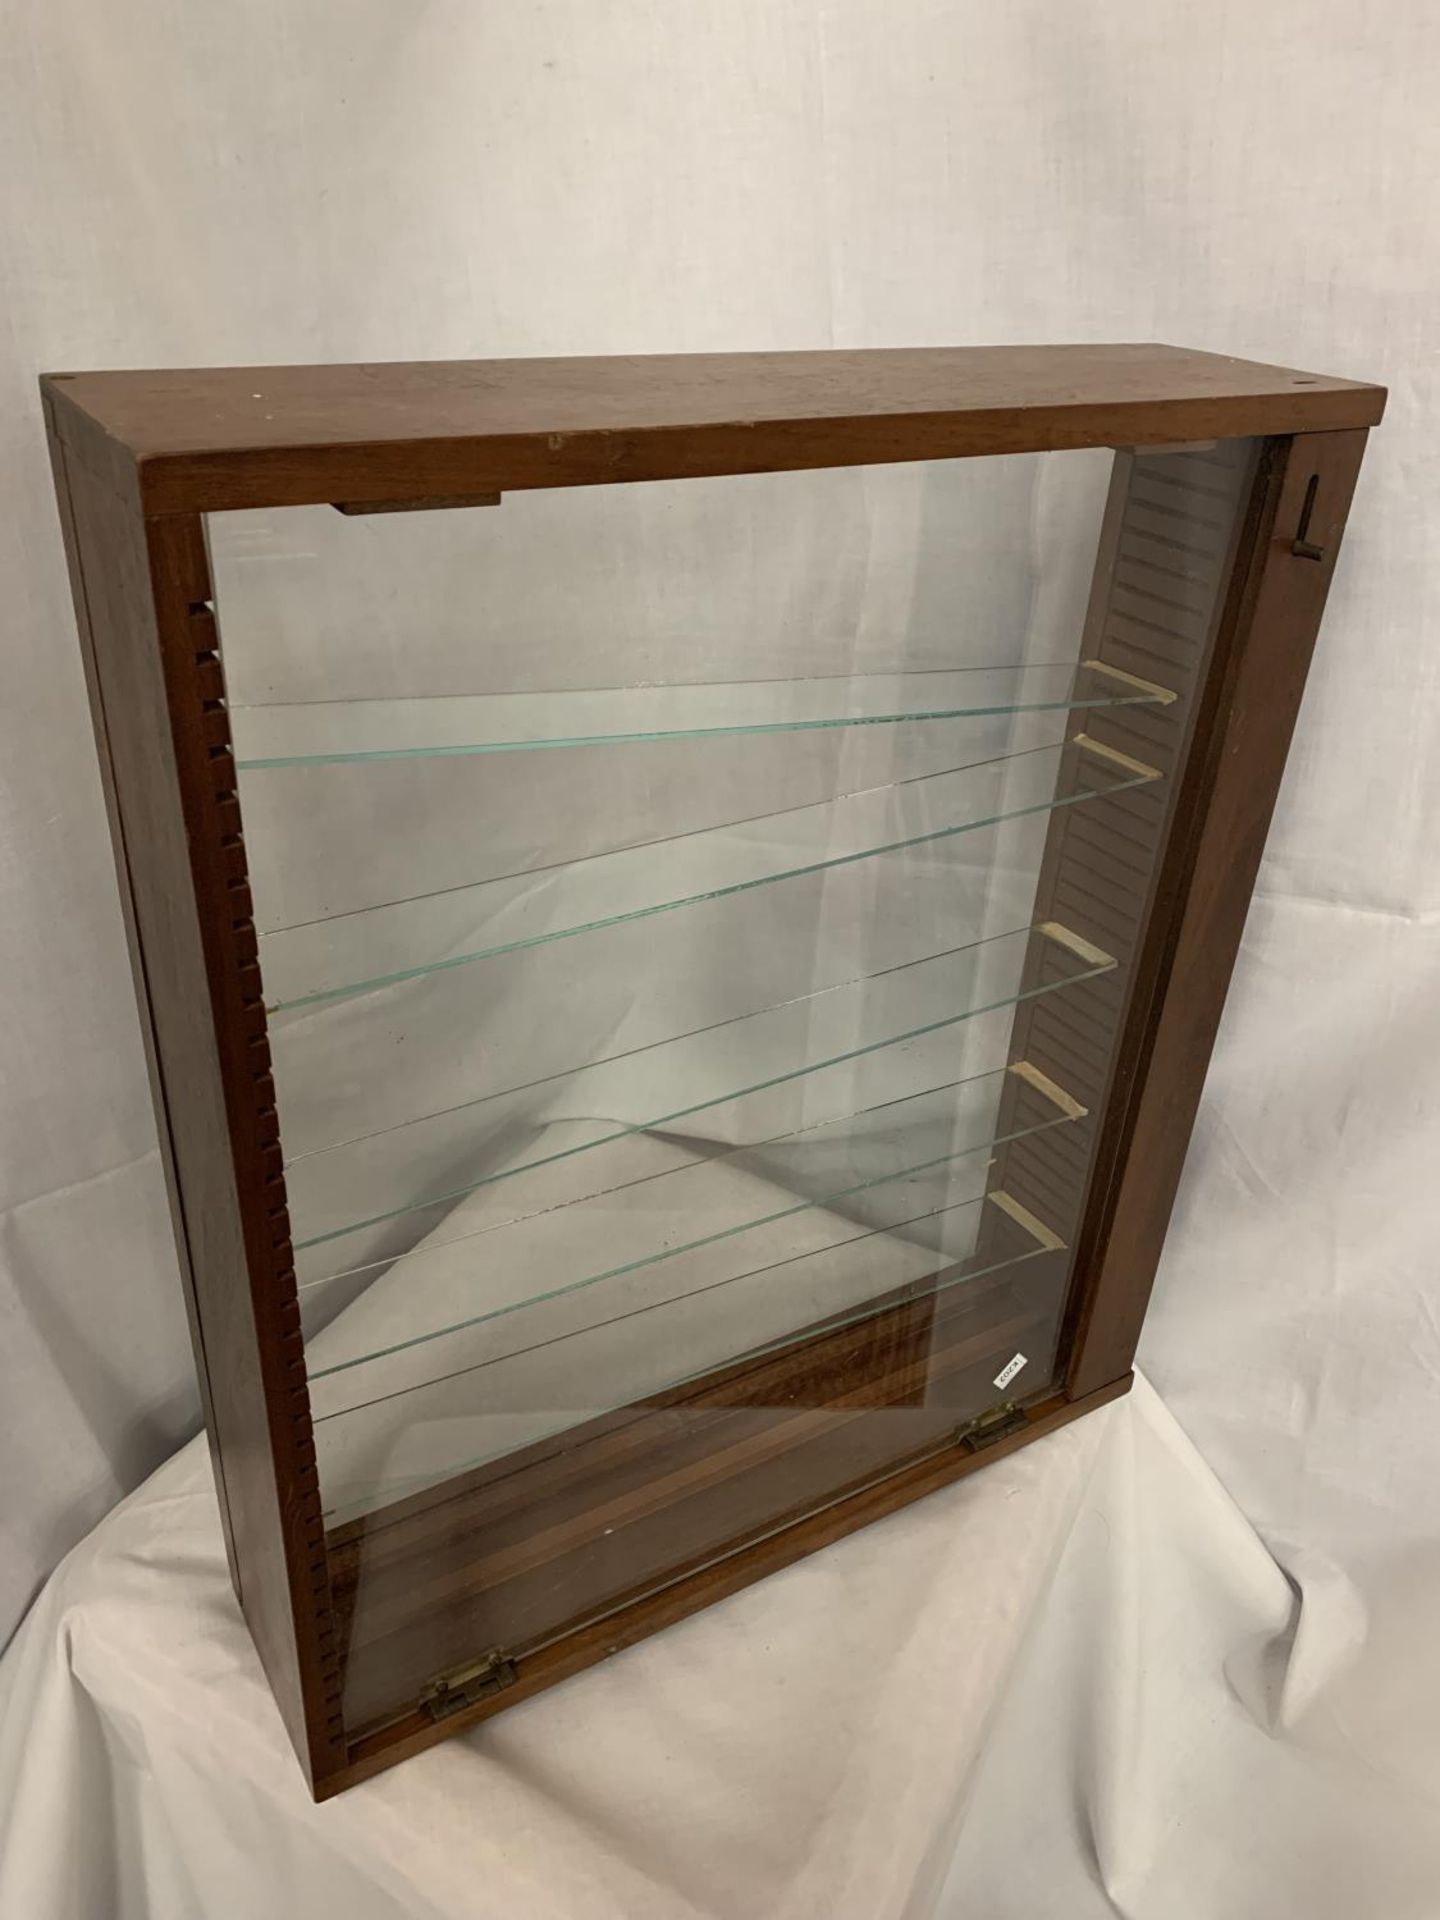 A WOODEN DISPLAY CABINET WITH ADJUSTABLE GLASS SHELVES